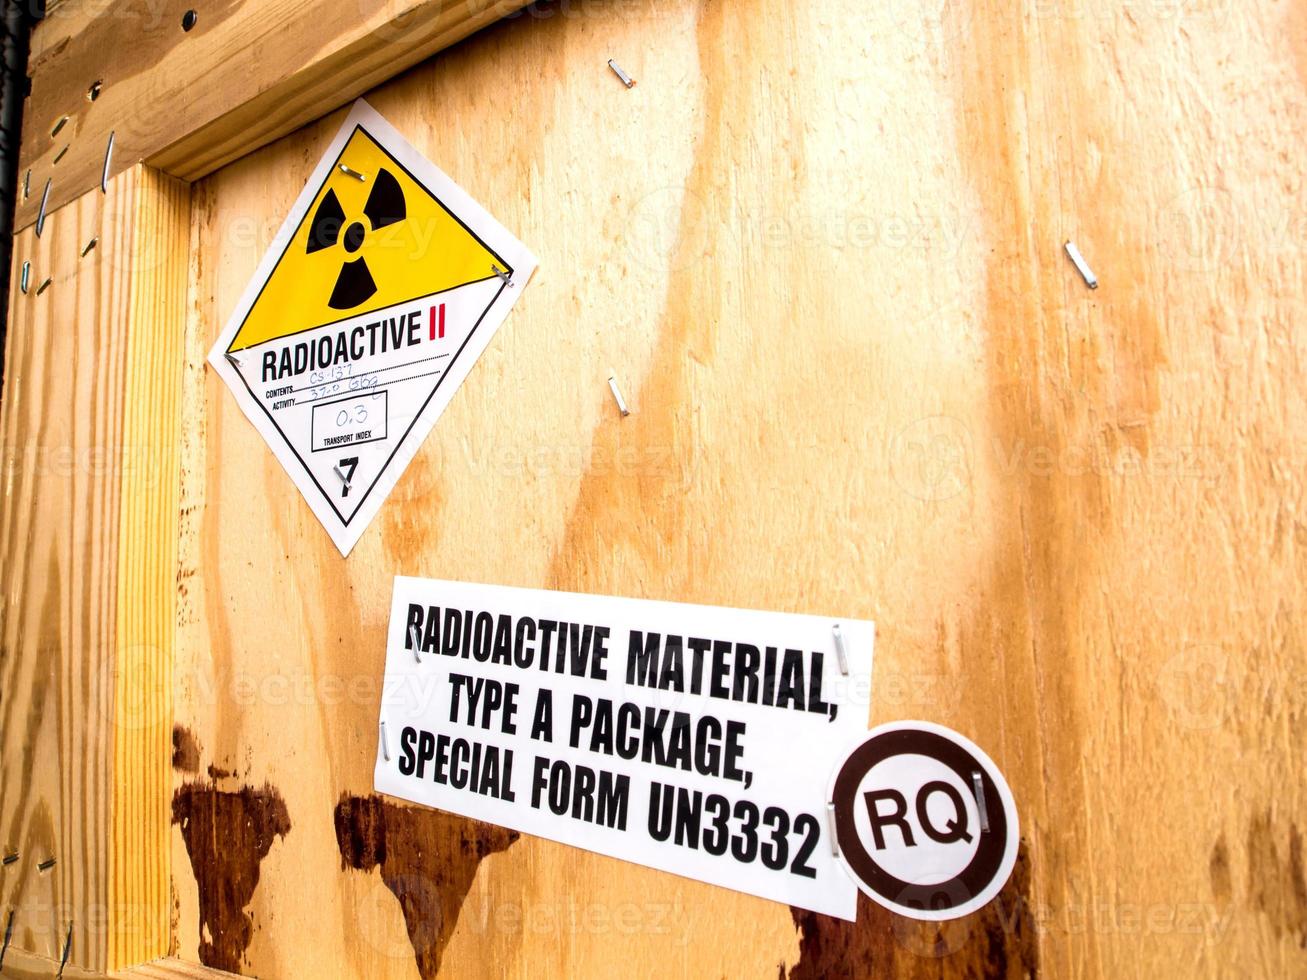 Radiation label beside the transport wood box type A package photo